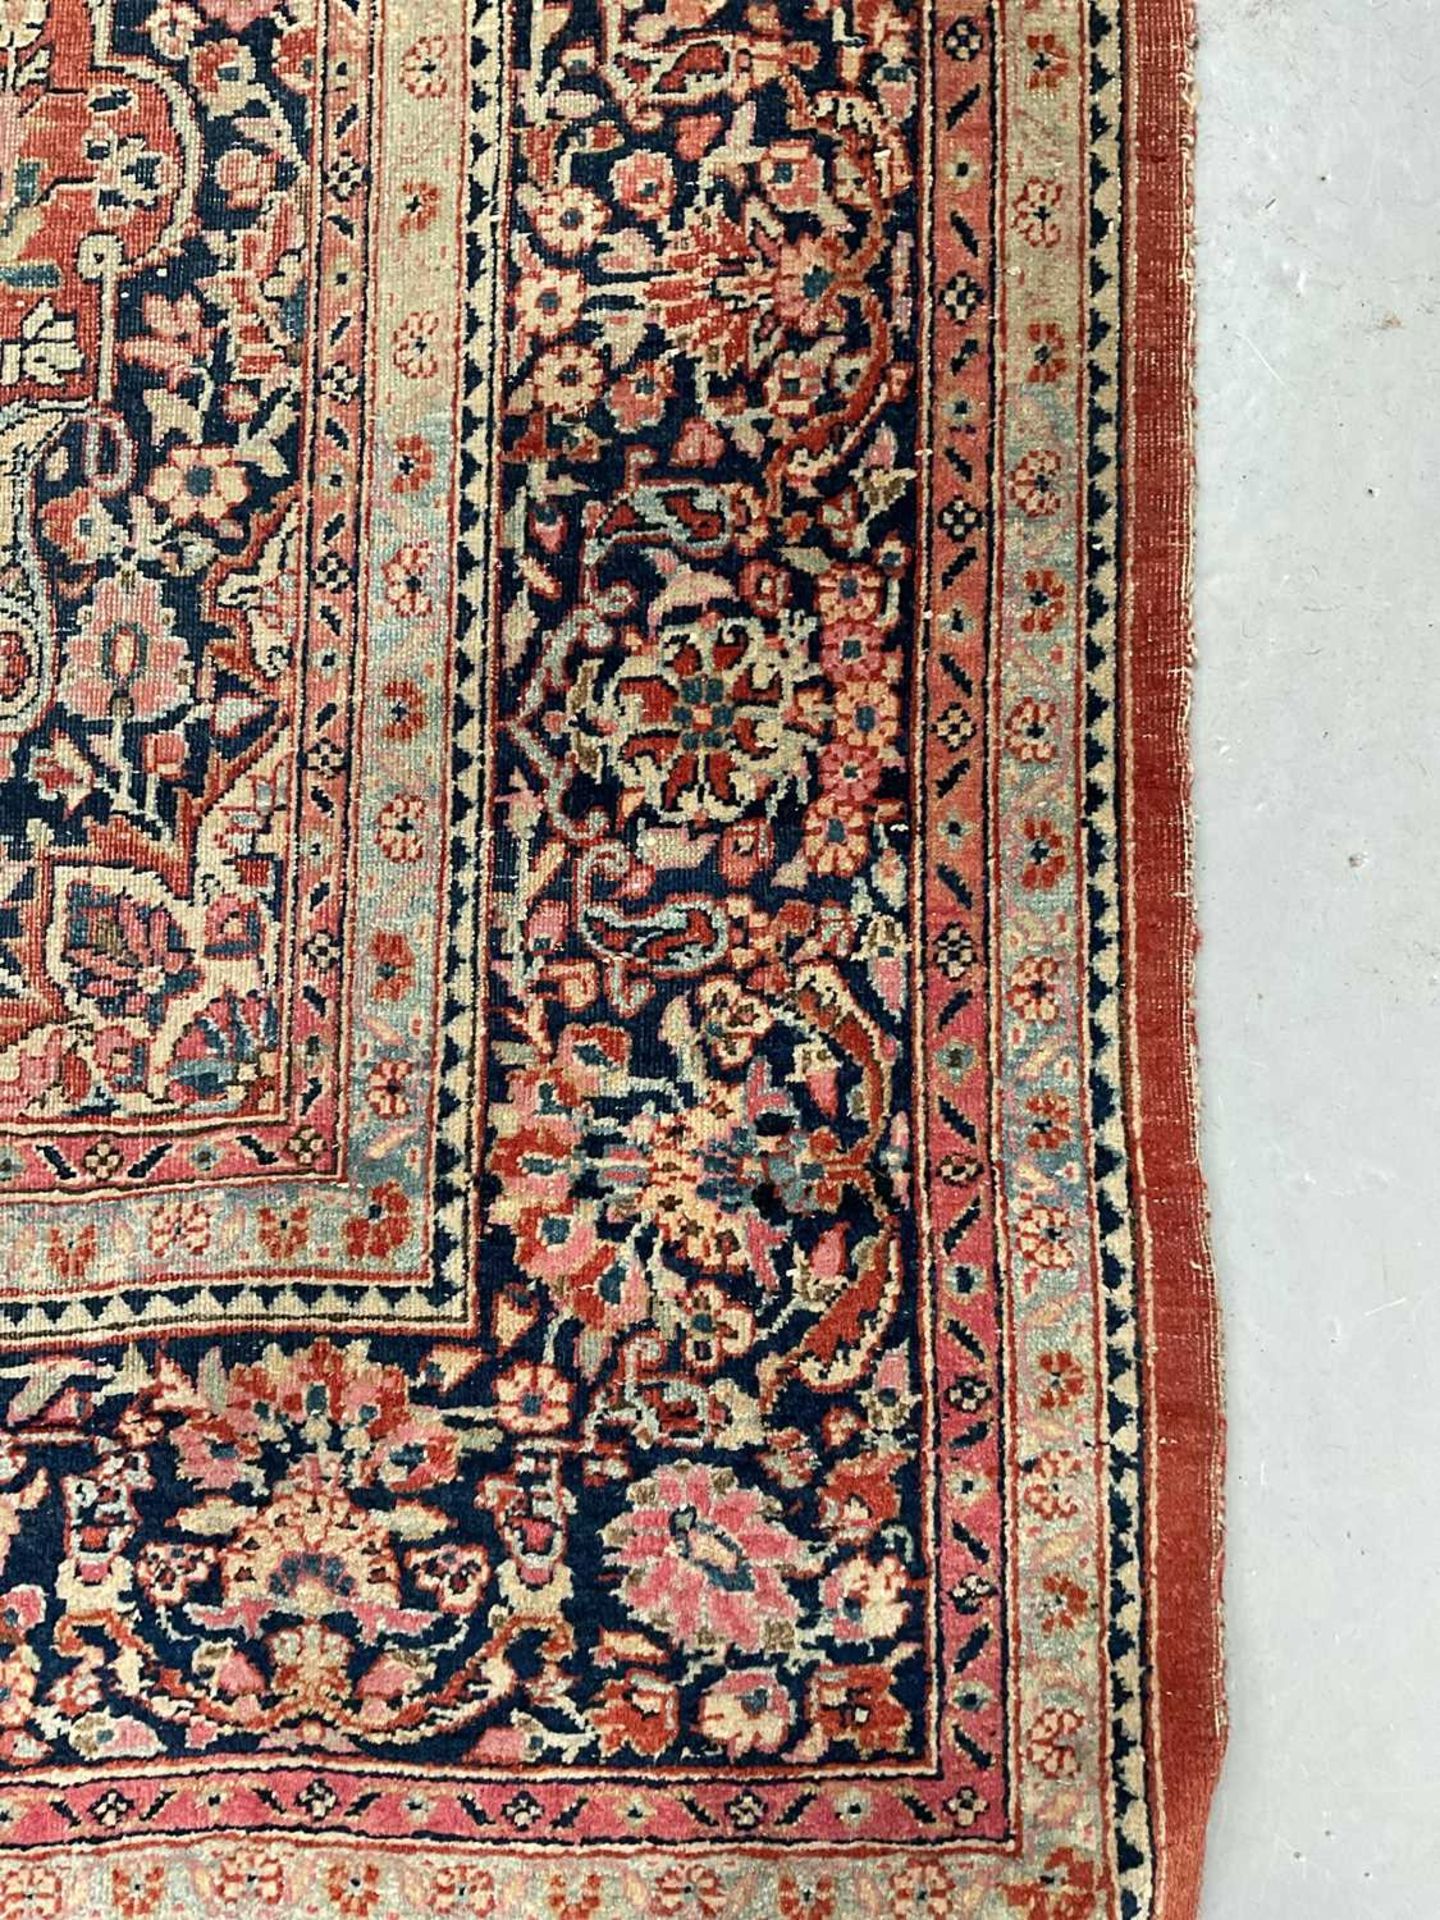 A Kashan rug with central medalion within borders, 202 x 133cm (2) Provenance: The contents of The - Image 8 of 9